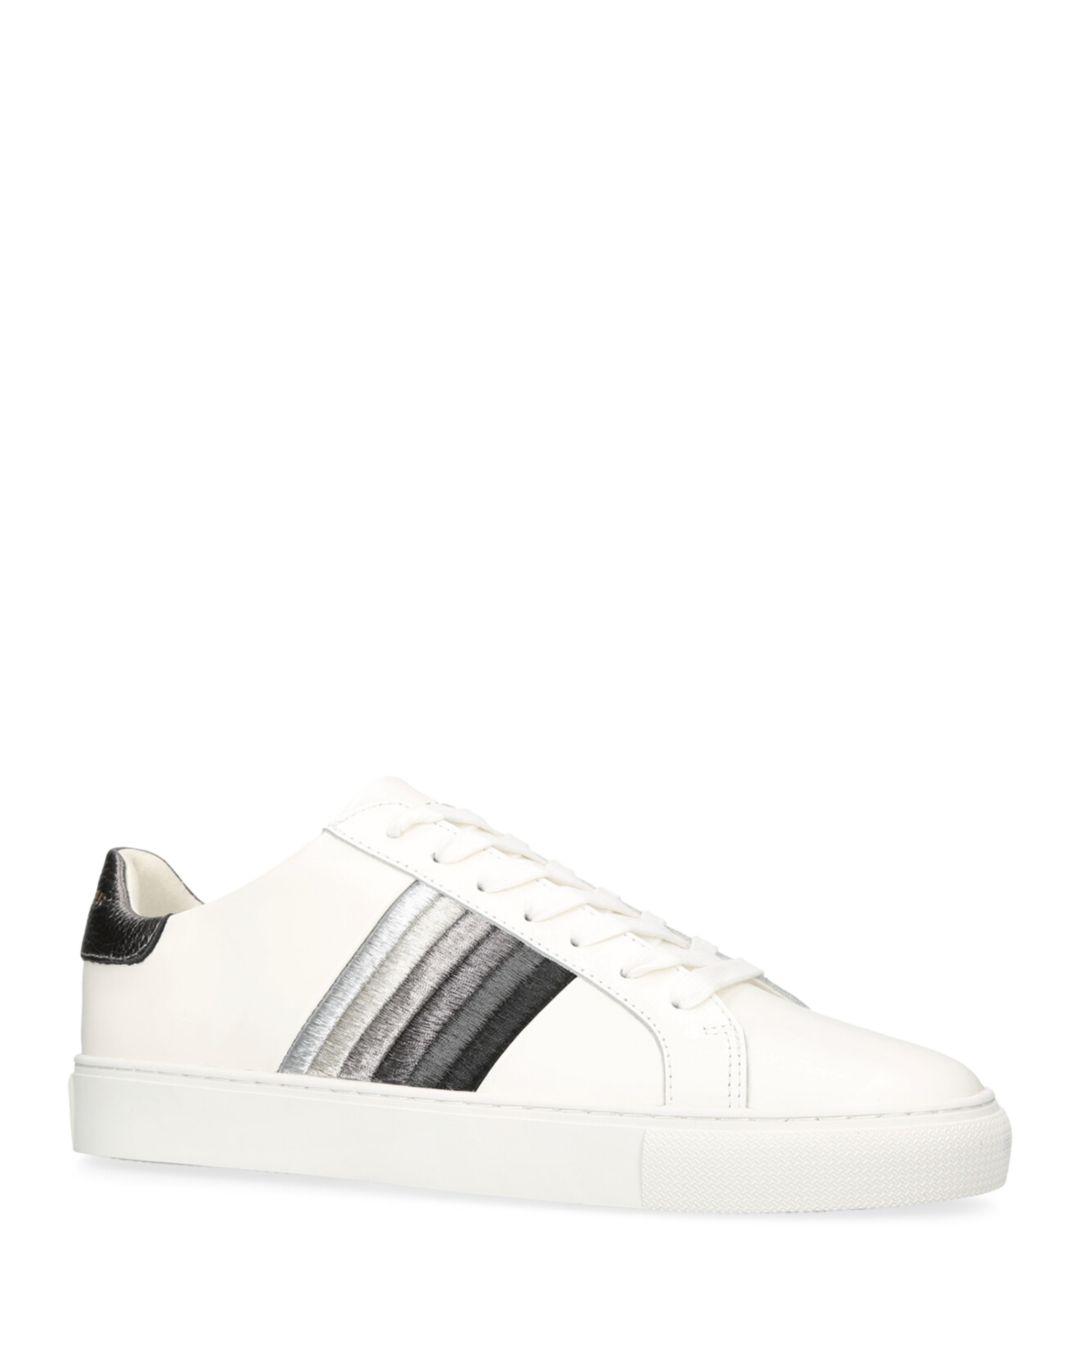 Kurt Geiger Lennon Rainbow Lace Up Sneakers in White for Men | Lyst